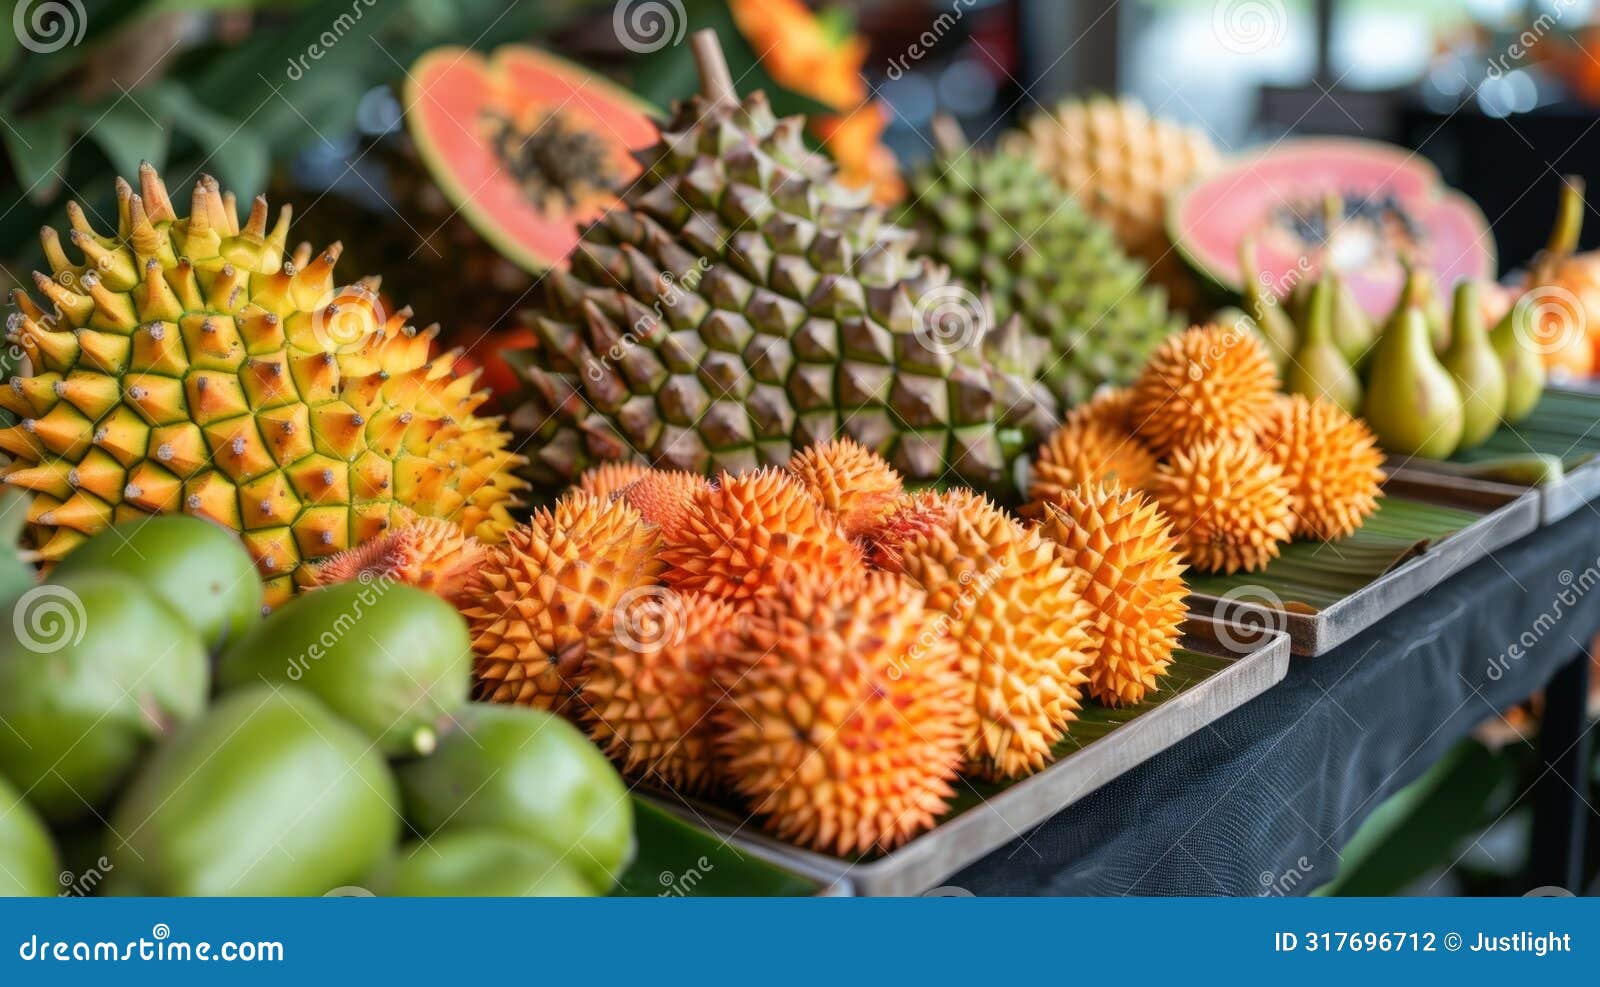 from jackfruit to rambutan this buffet showcases the finest and rarest of fruits